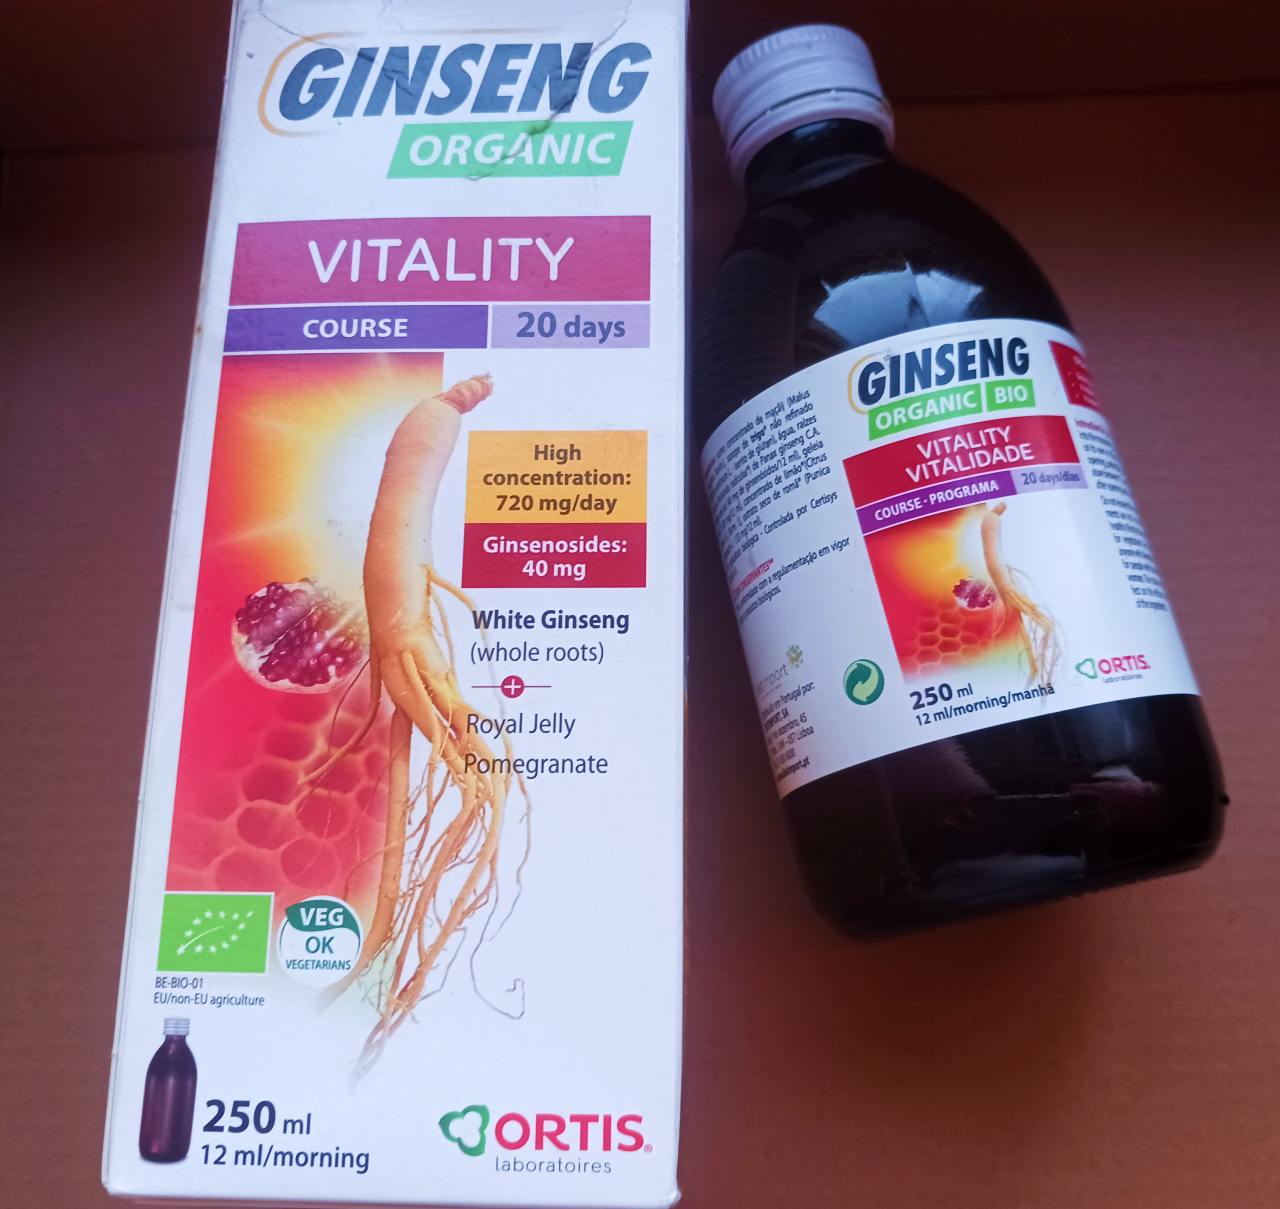 Ortis - Ginseng Vitality Supplement Review (White Ginseng, Royal Jelly & Pomegranate)